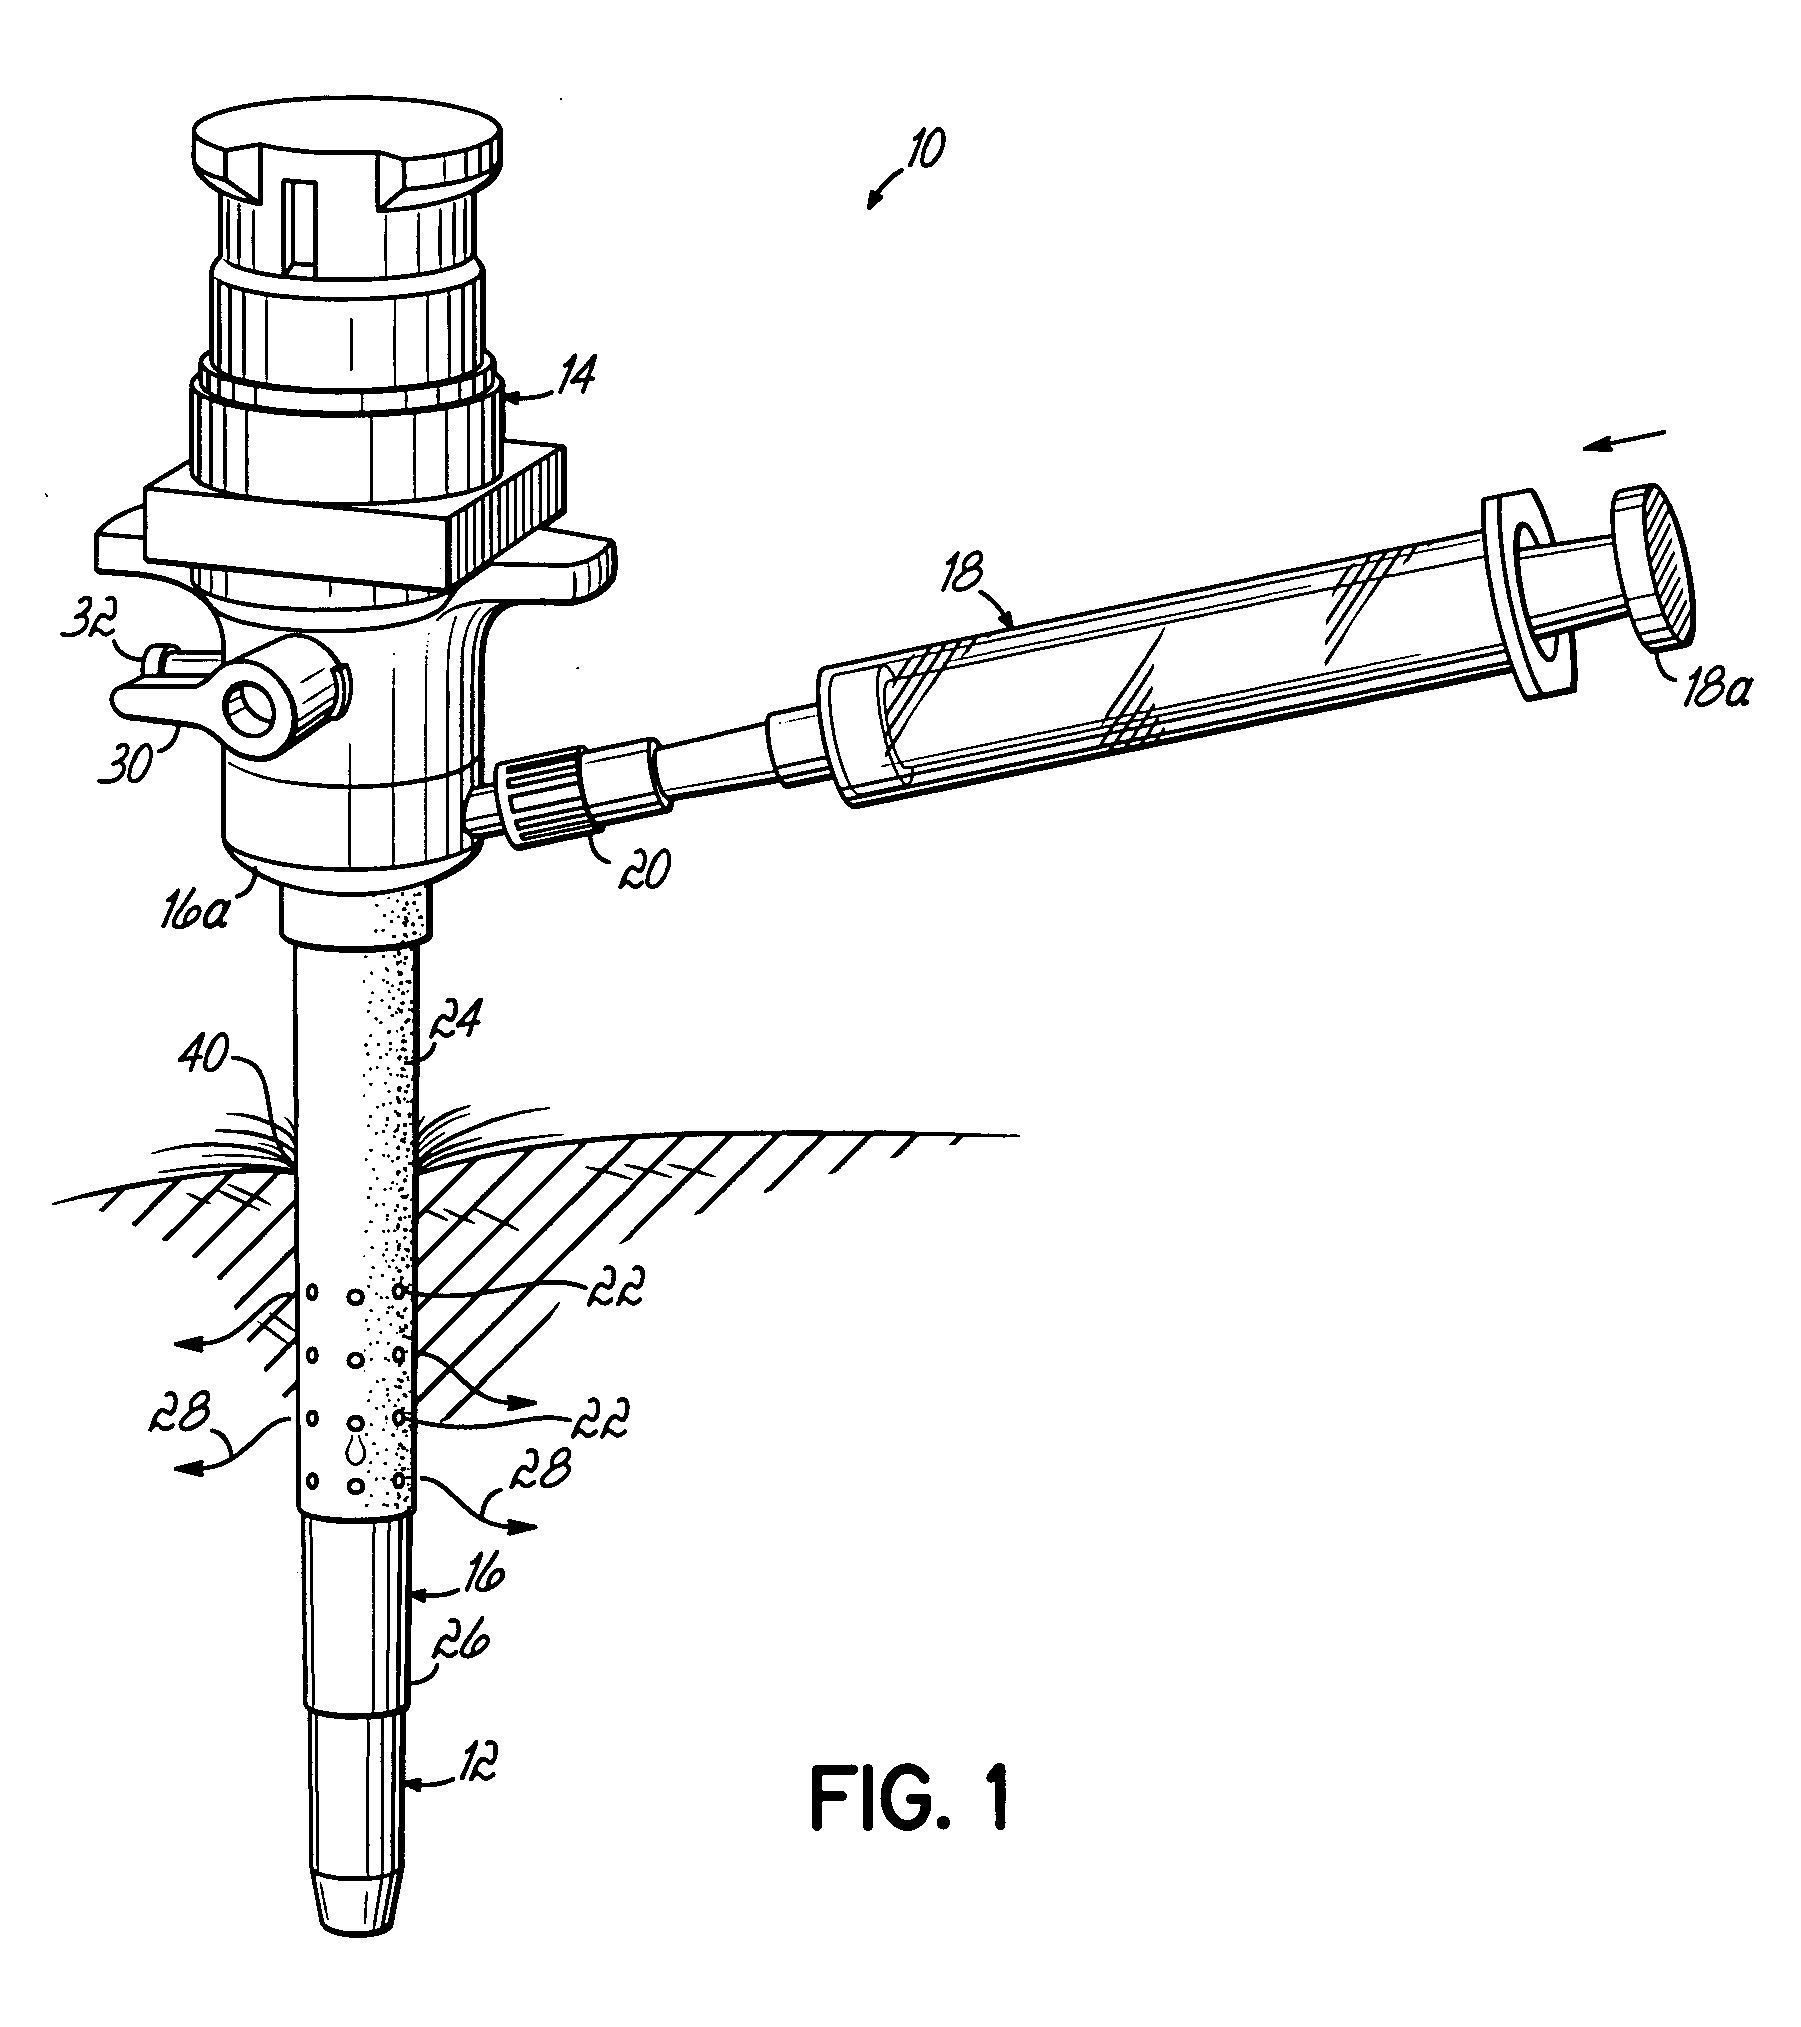 Trocar-cannula complex, cannula and method for delivering fluids during minimally invasive surgery